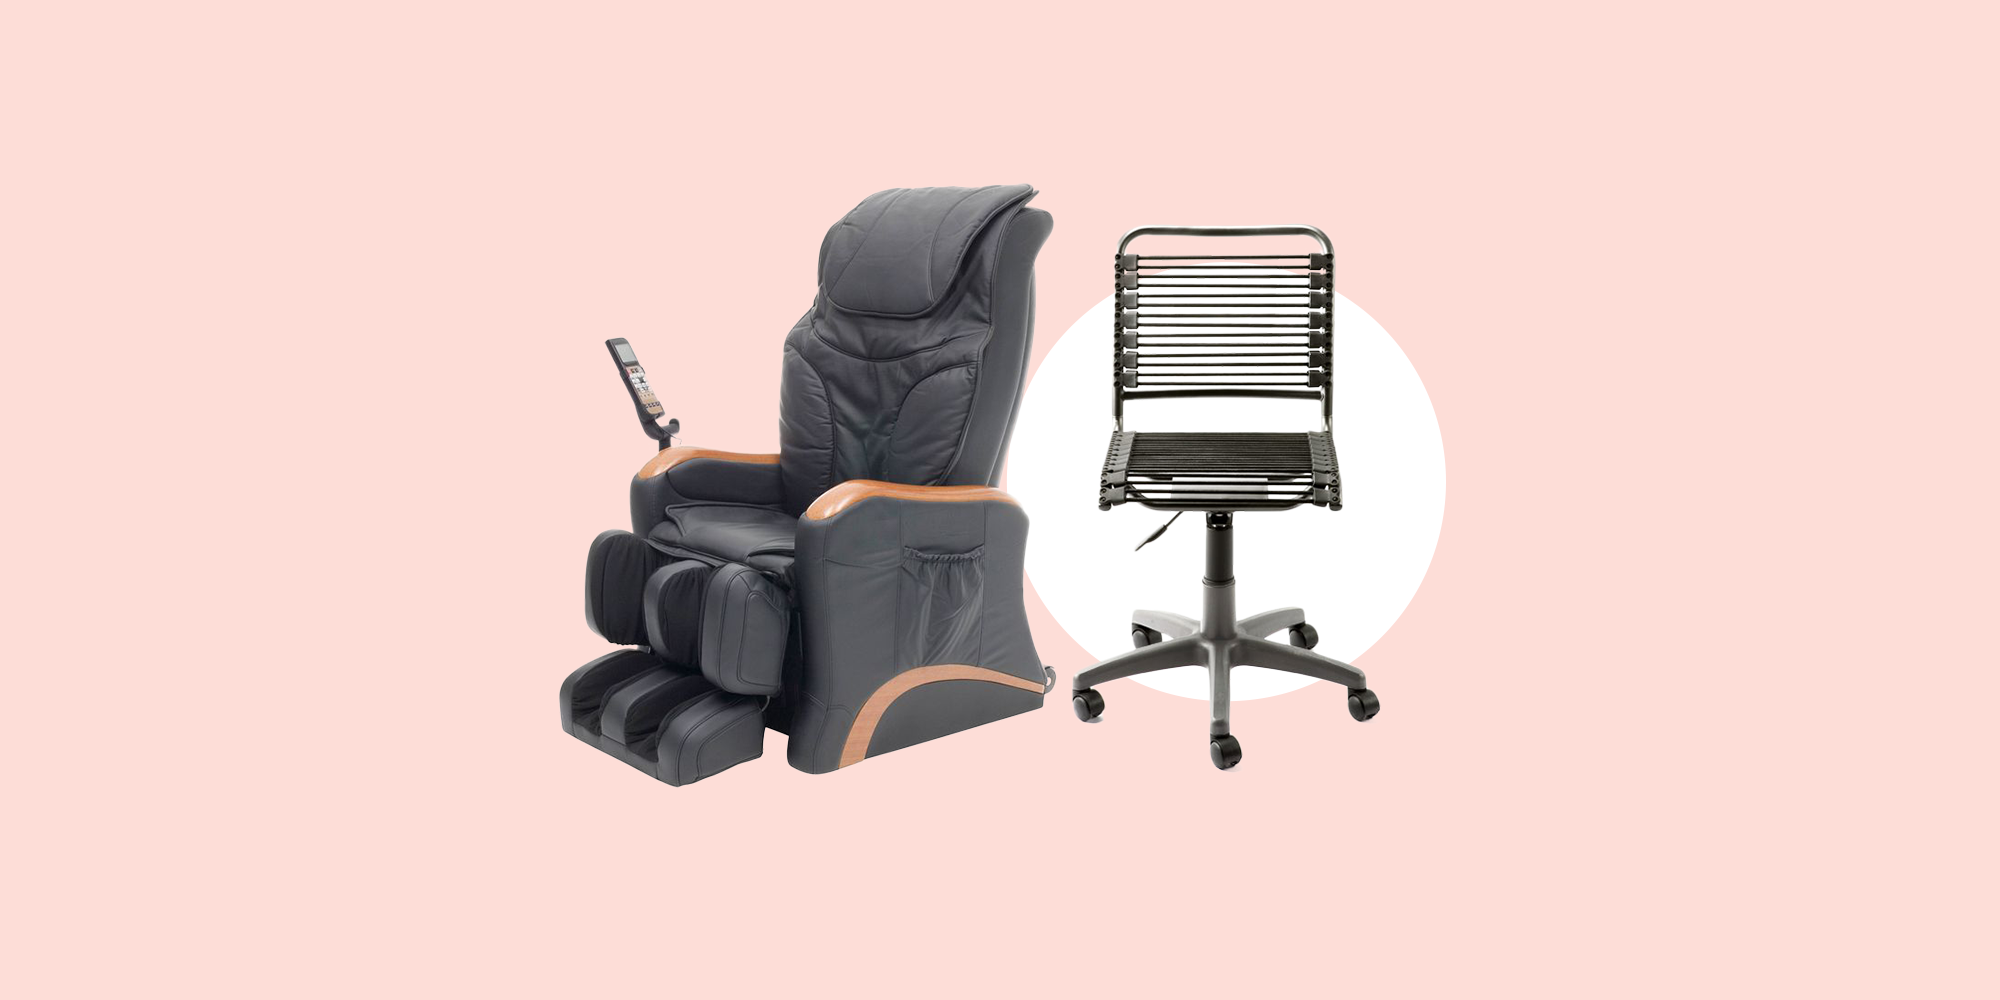 Anal Massage Chair - Sex Chairs - Best Sex Chairs